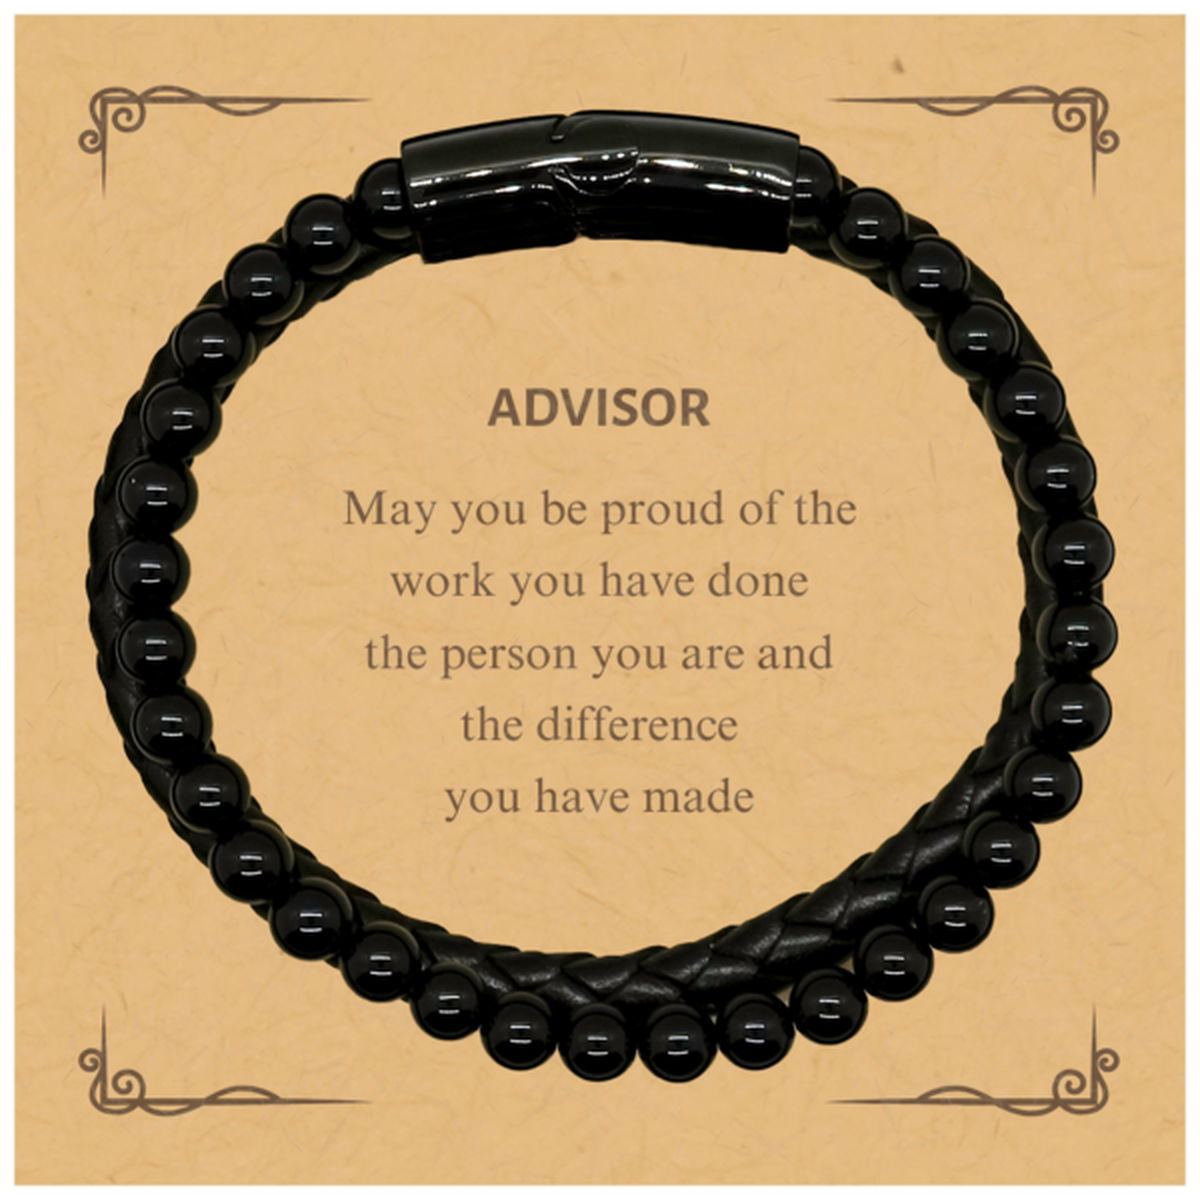 Advisor May you be proud of the work you have done, Retirement Advisor Stone Leather Bracelets for Colleague Appreciation Gifts Amazing for Advisor